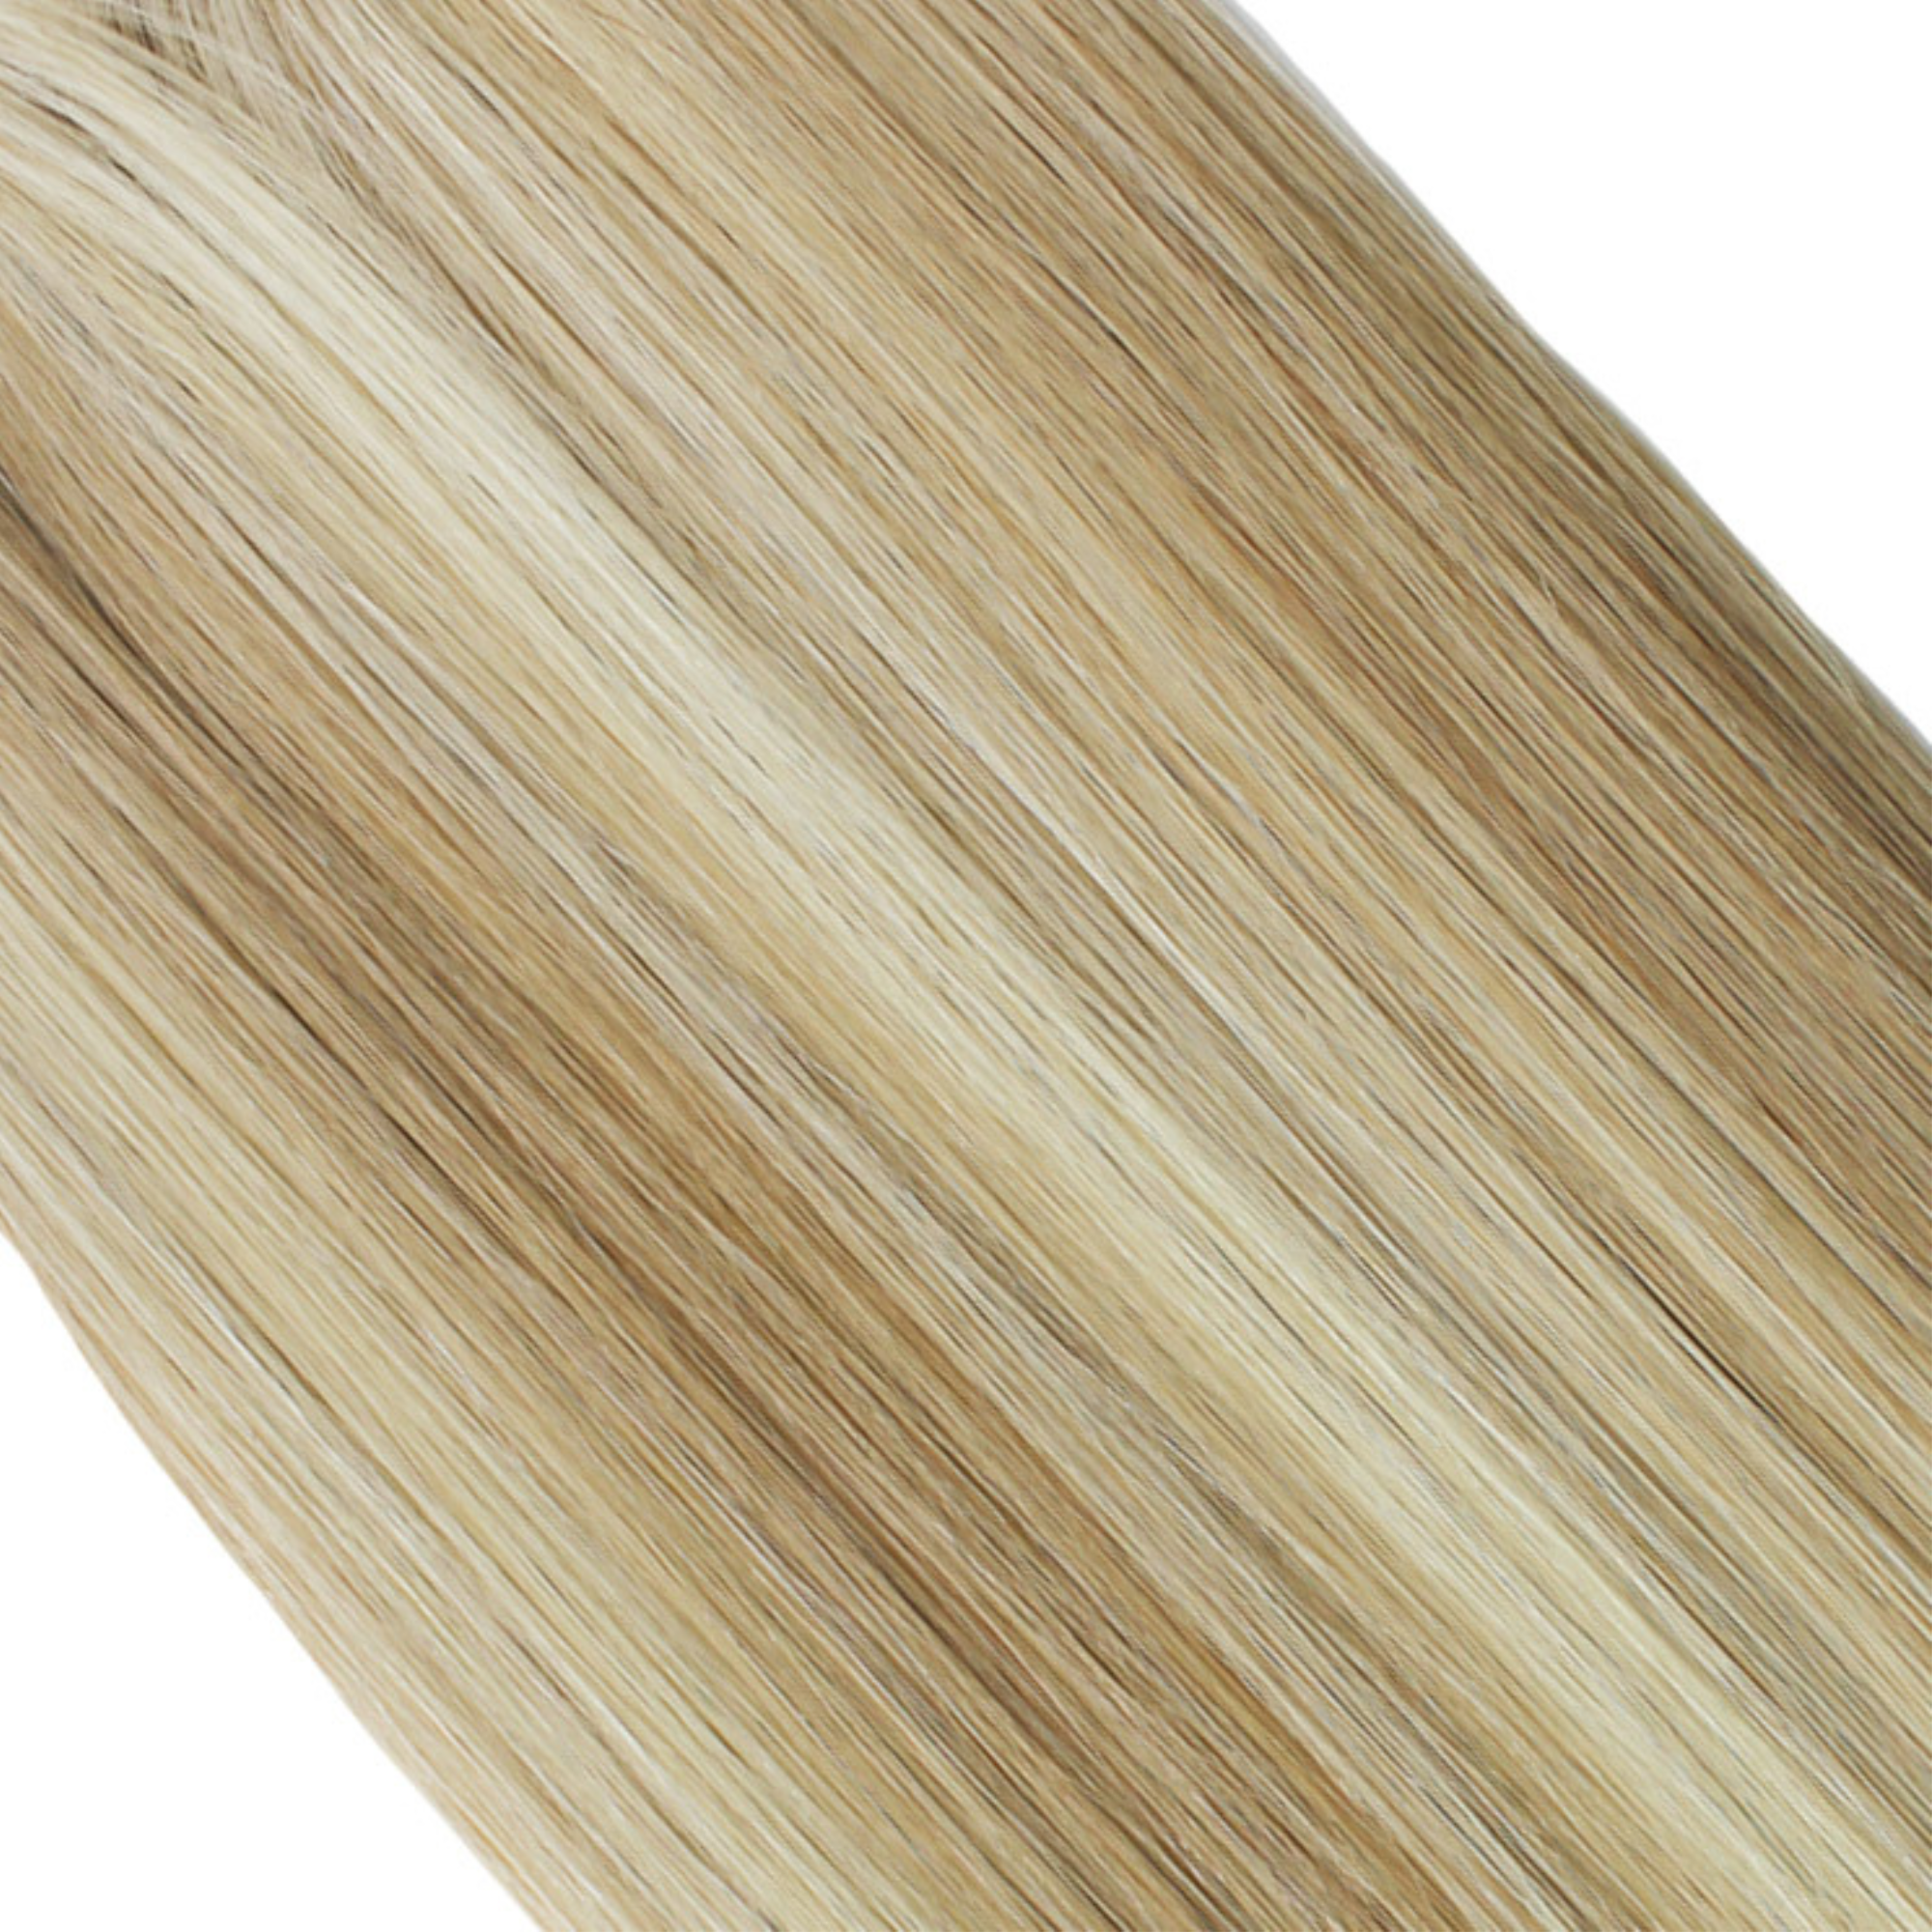 "hair rehab london 20" length 180 grams weight luxe clip-in hair extensions shade titled coachella blonde"